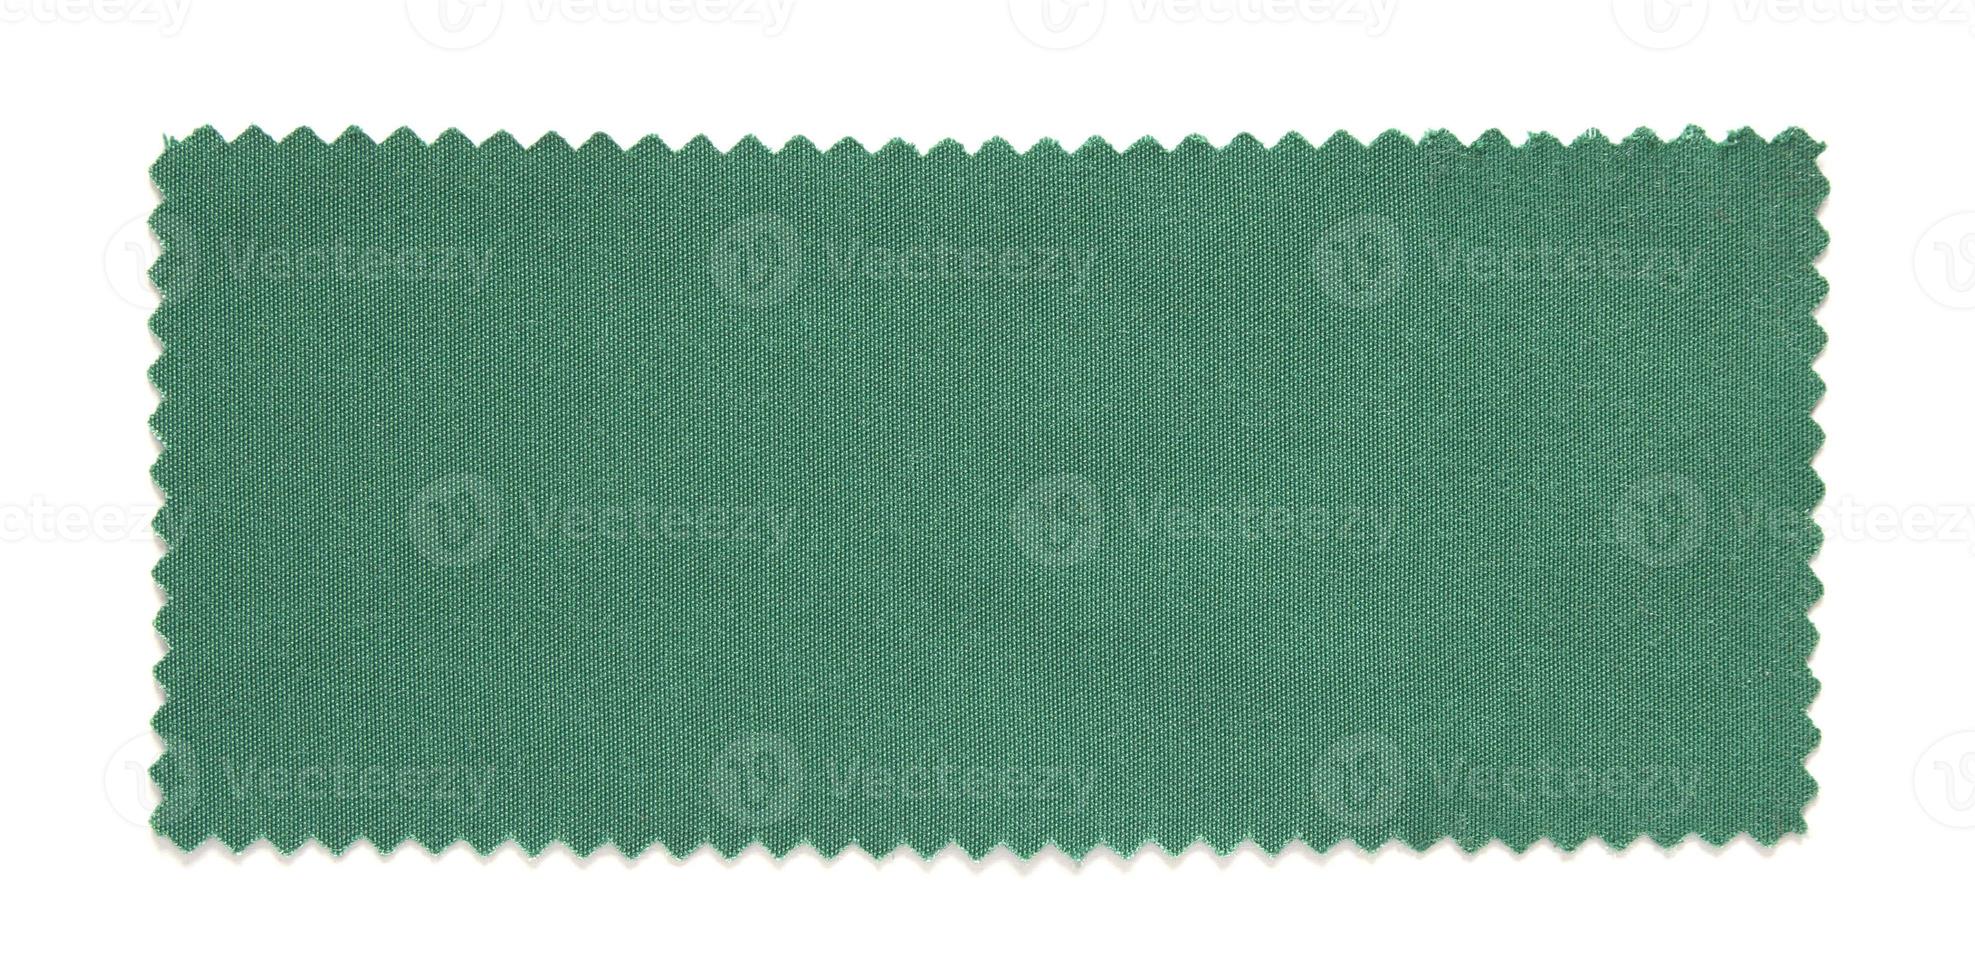 green fabric swatch samples isolated on white background photo